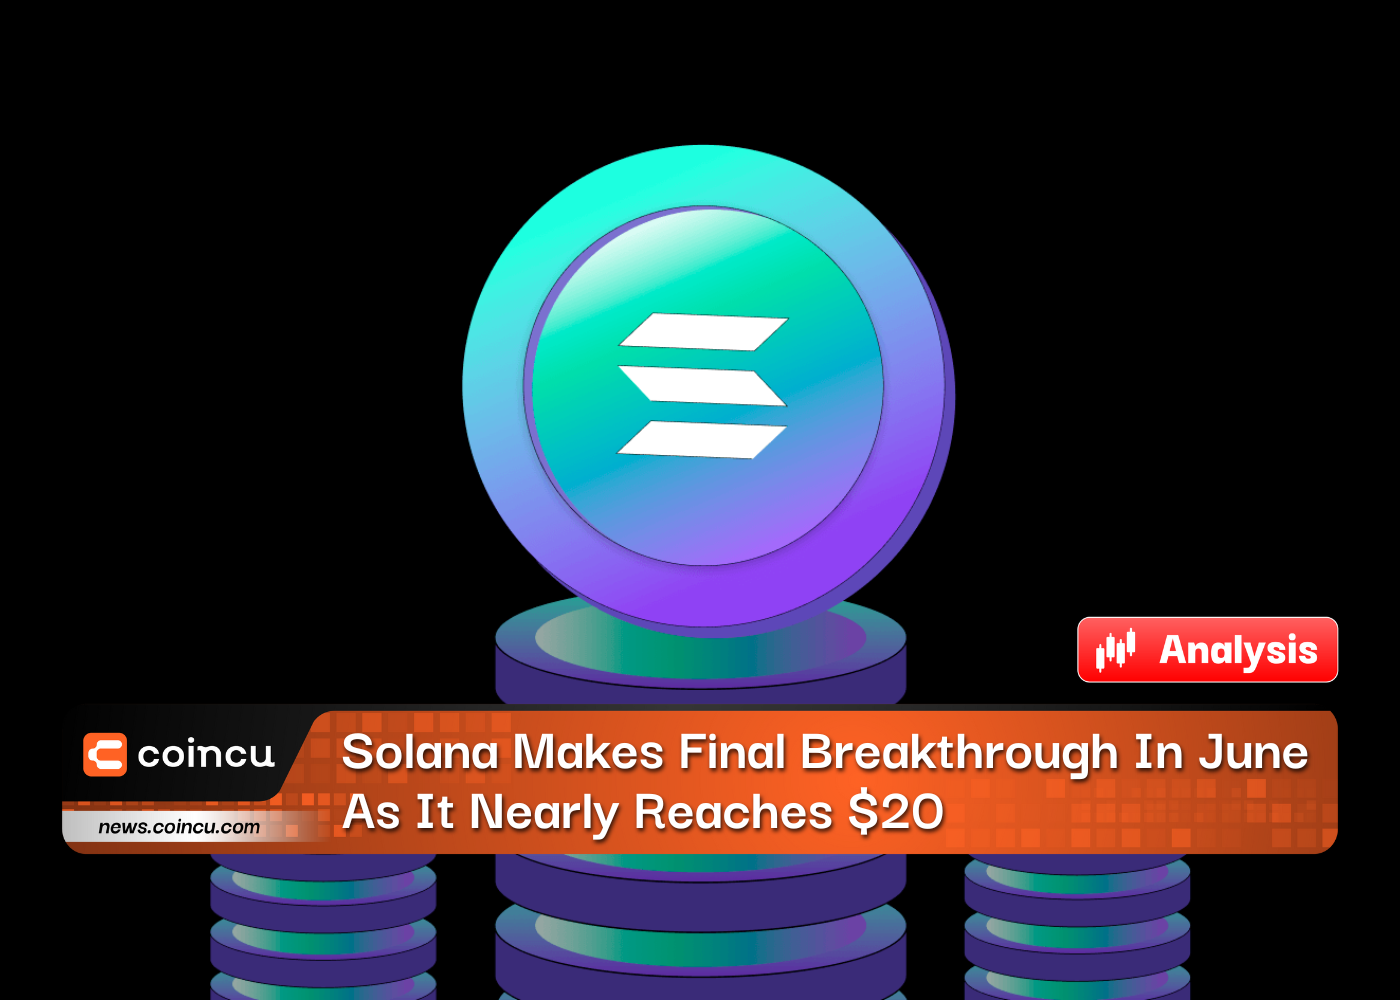 Solana Makes Final Breakthrough In June As It Nearly Reaches $20